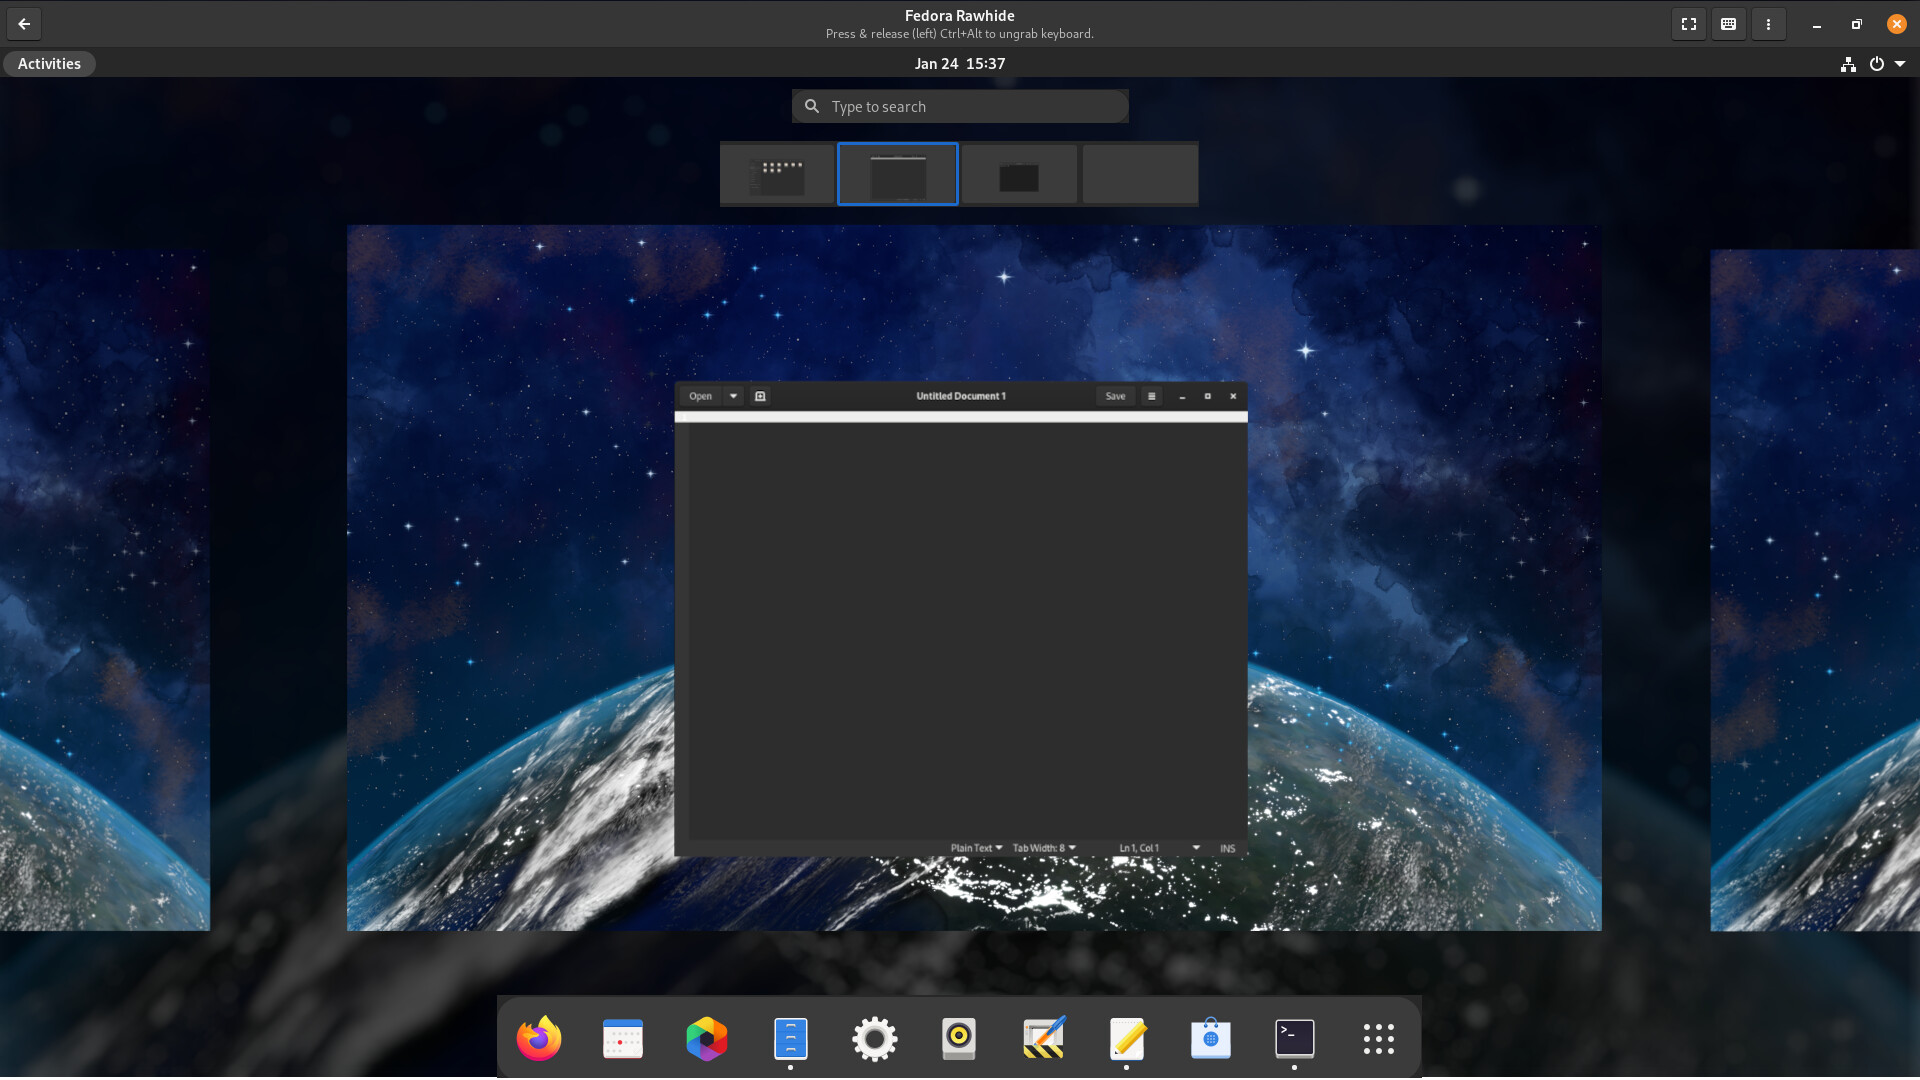 r/gnome - Gnome 40 design Proposal. Use Blurred desktop background as overview background and use grey panels to indicate different workspaces